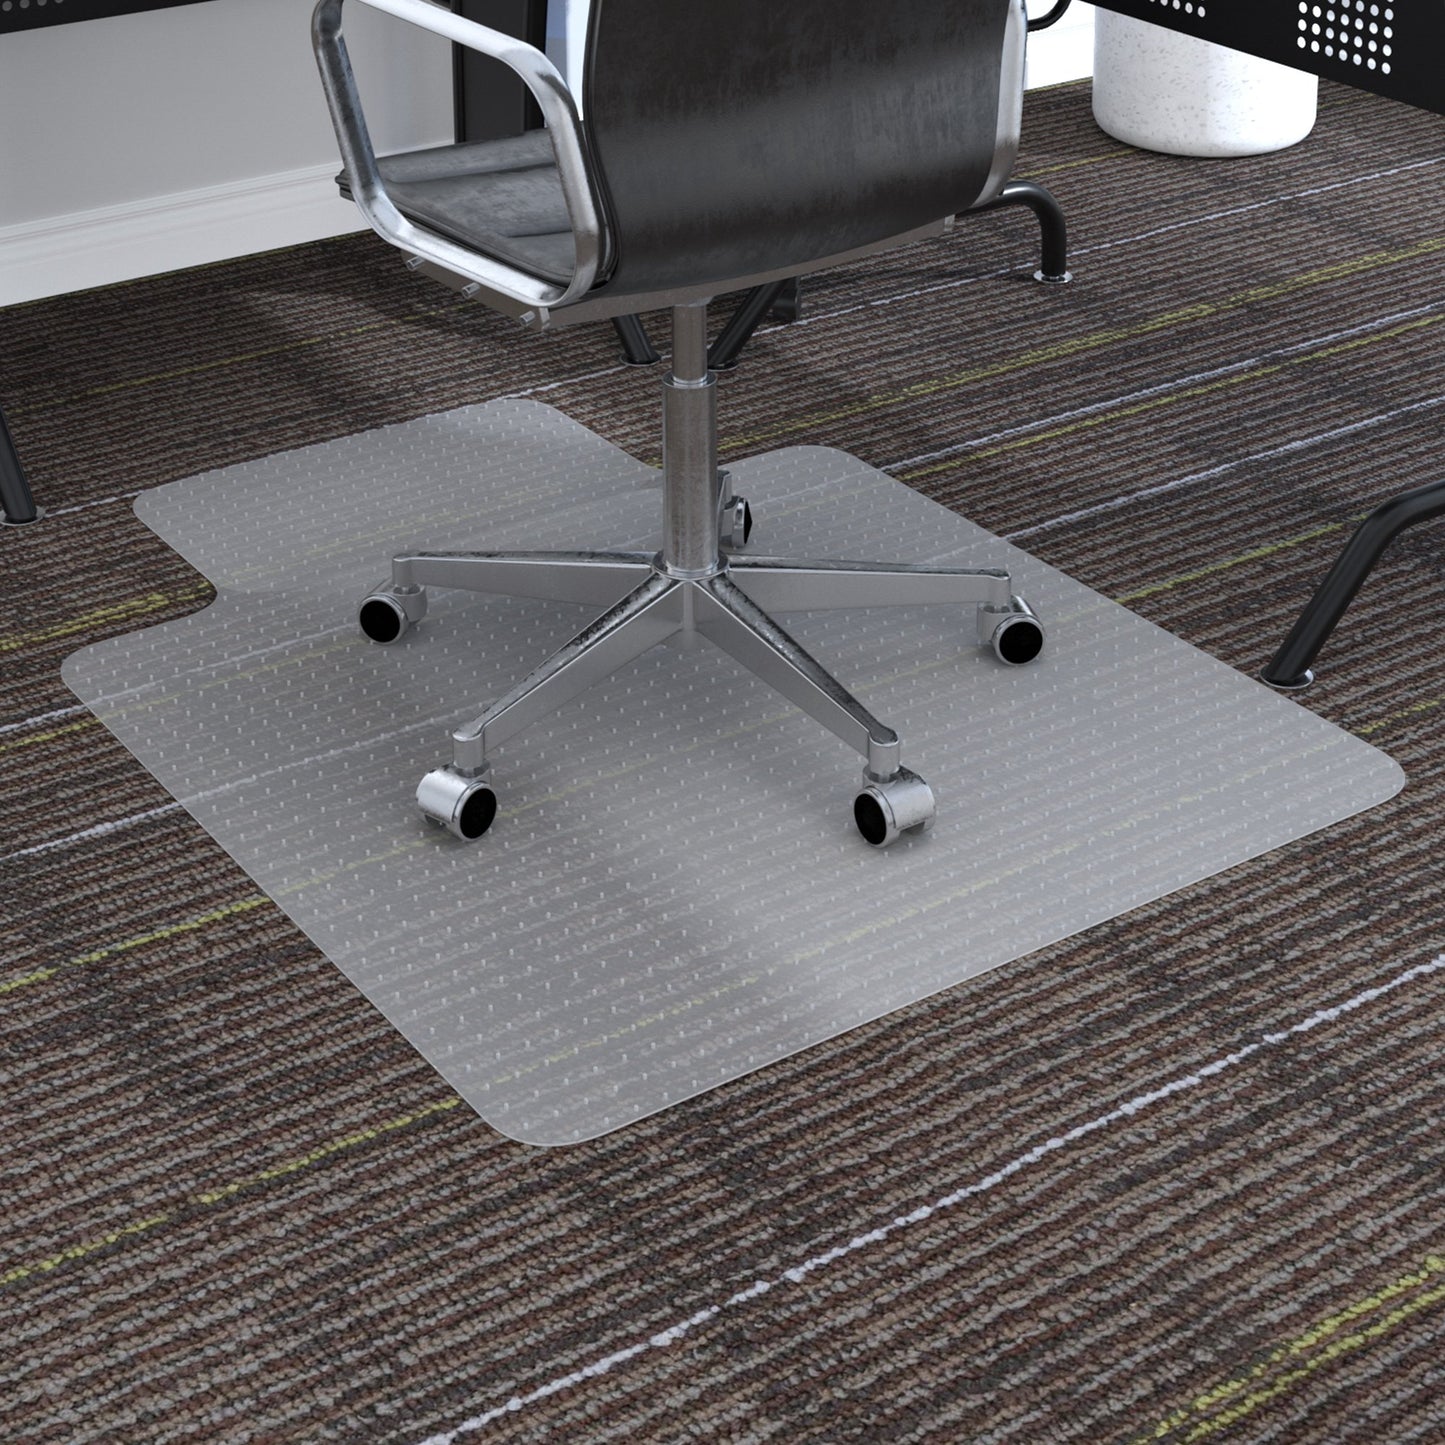 Homcom Office Carpet Protector Chair Mat High Impact Strength Clear Spike Non Slip Chairmat Frosted Lipped